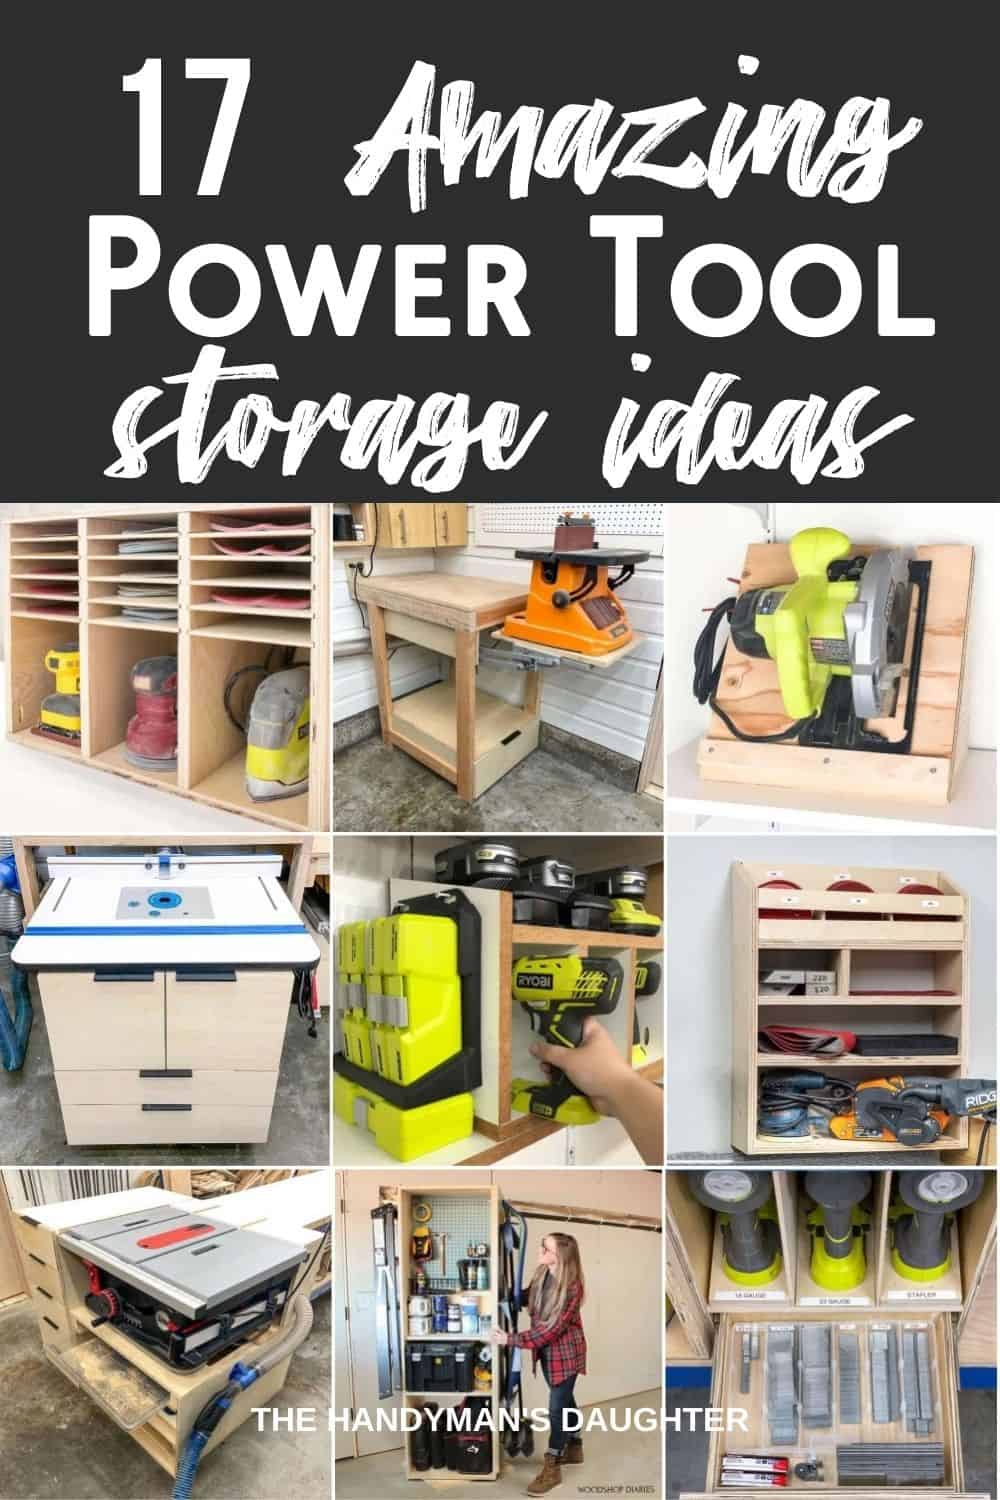 Single Prong Tool Rack, Extension Cord Storage